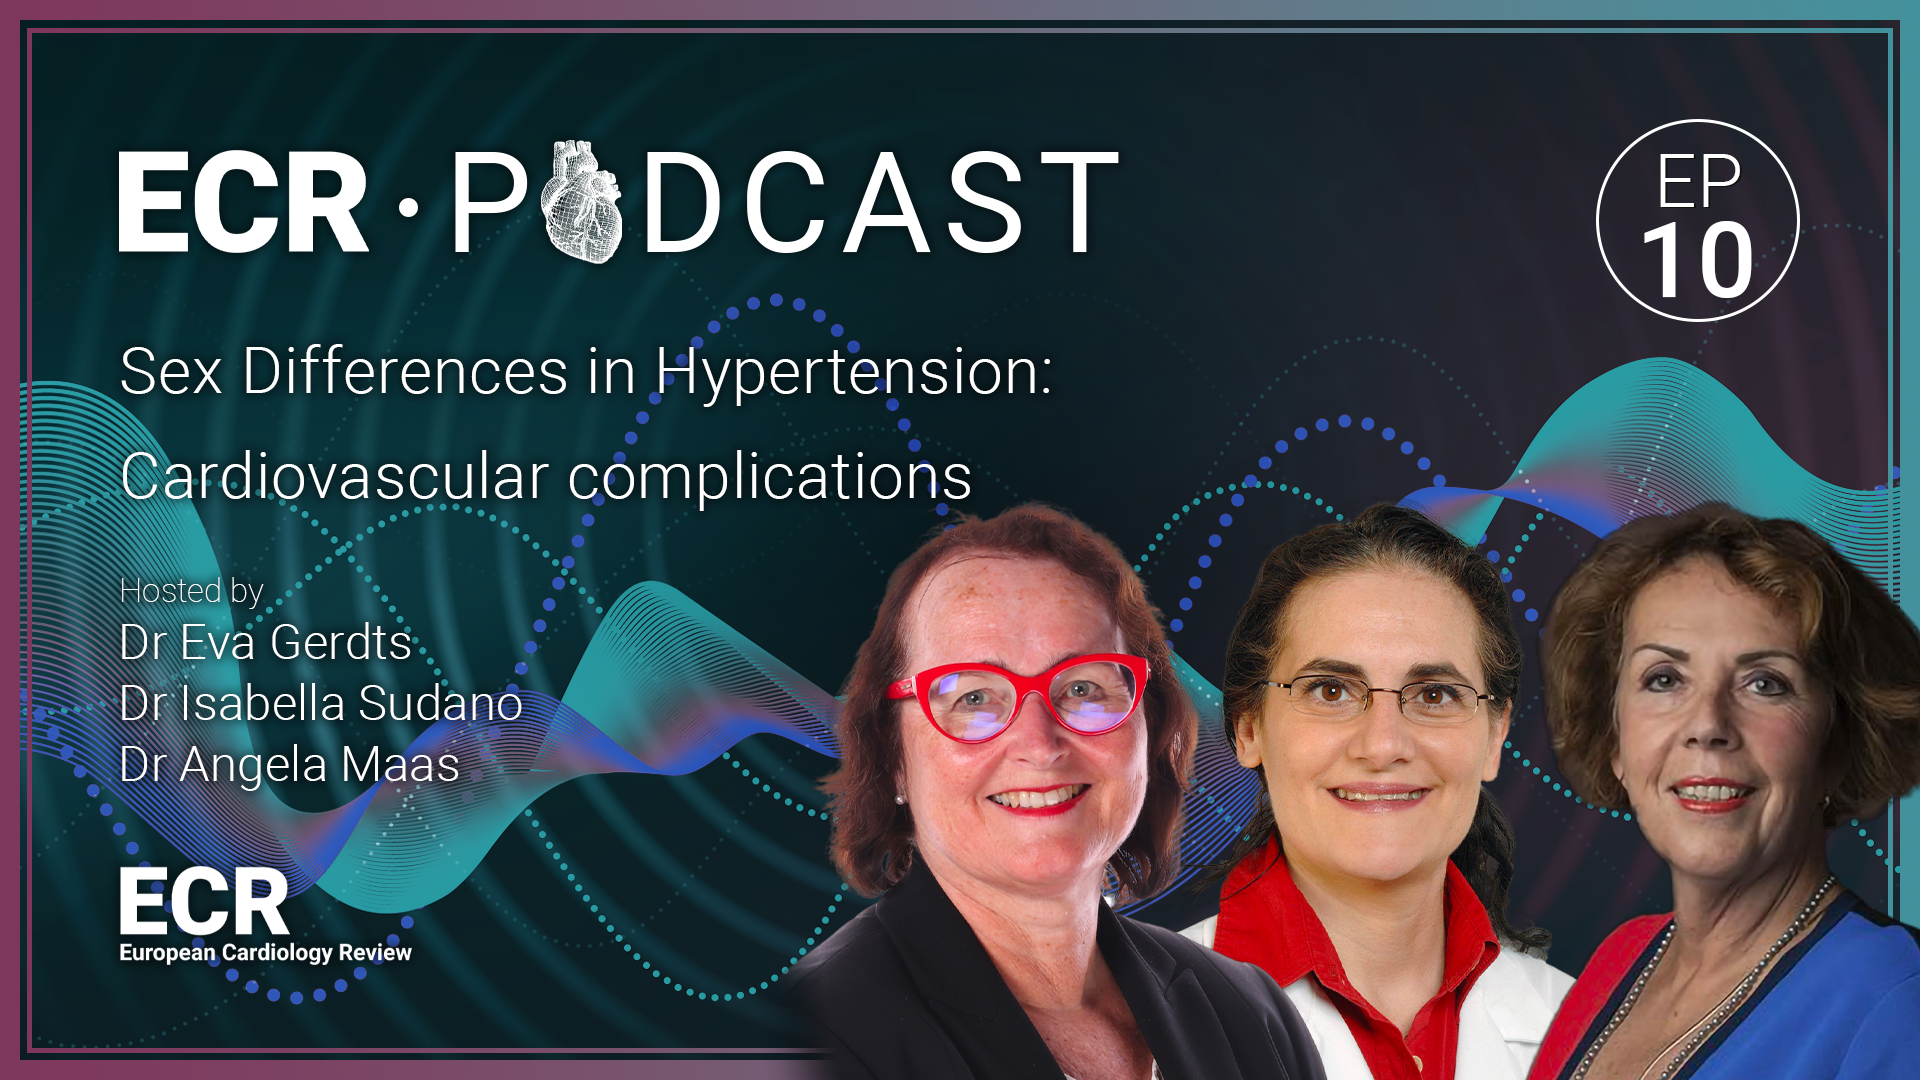 Ep 10: Sex Differences in Hypertension: Cardiovascular complications